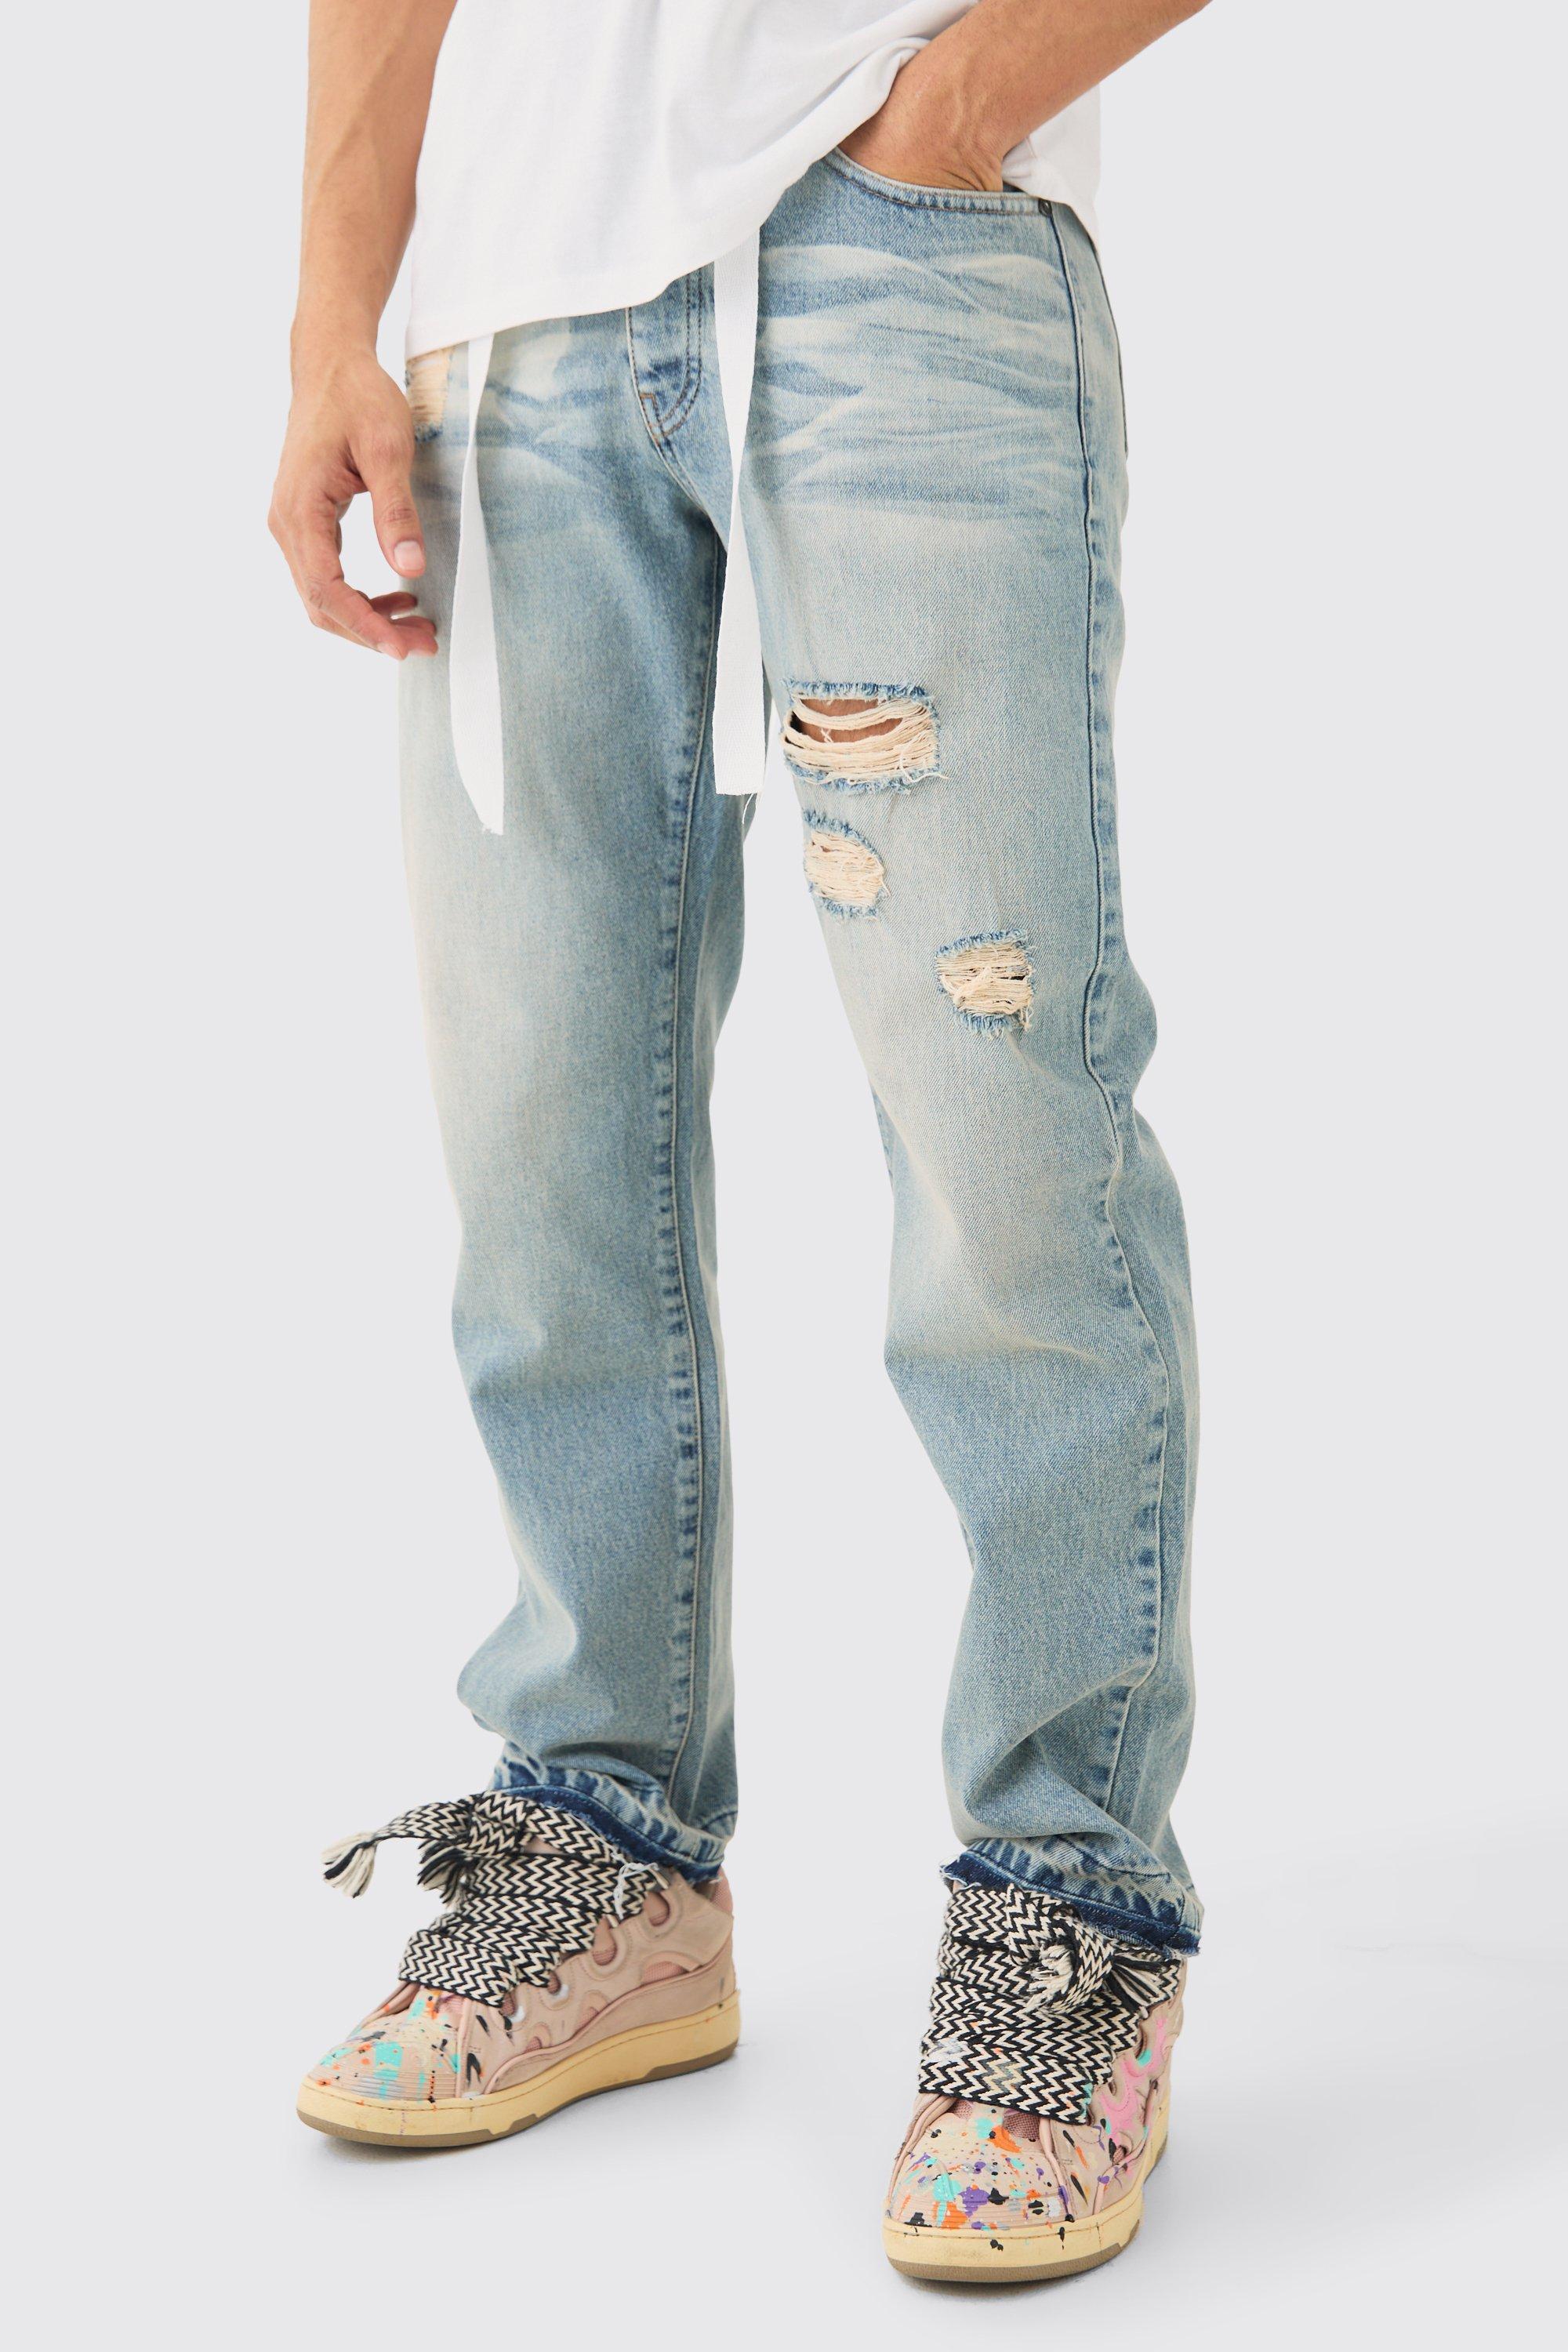 Image of Relaxed Rigid Ripped Let Down Hem Jeans With Extended Drawcords In Antique Blue, Azzurro